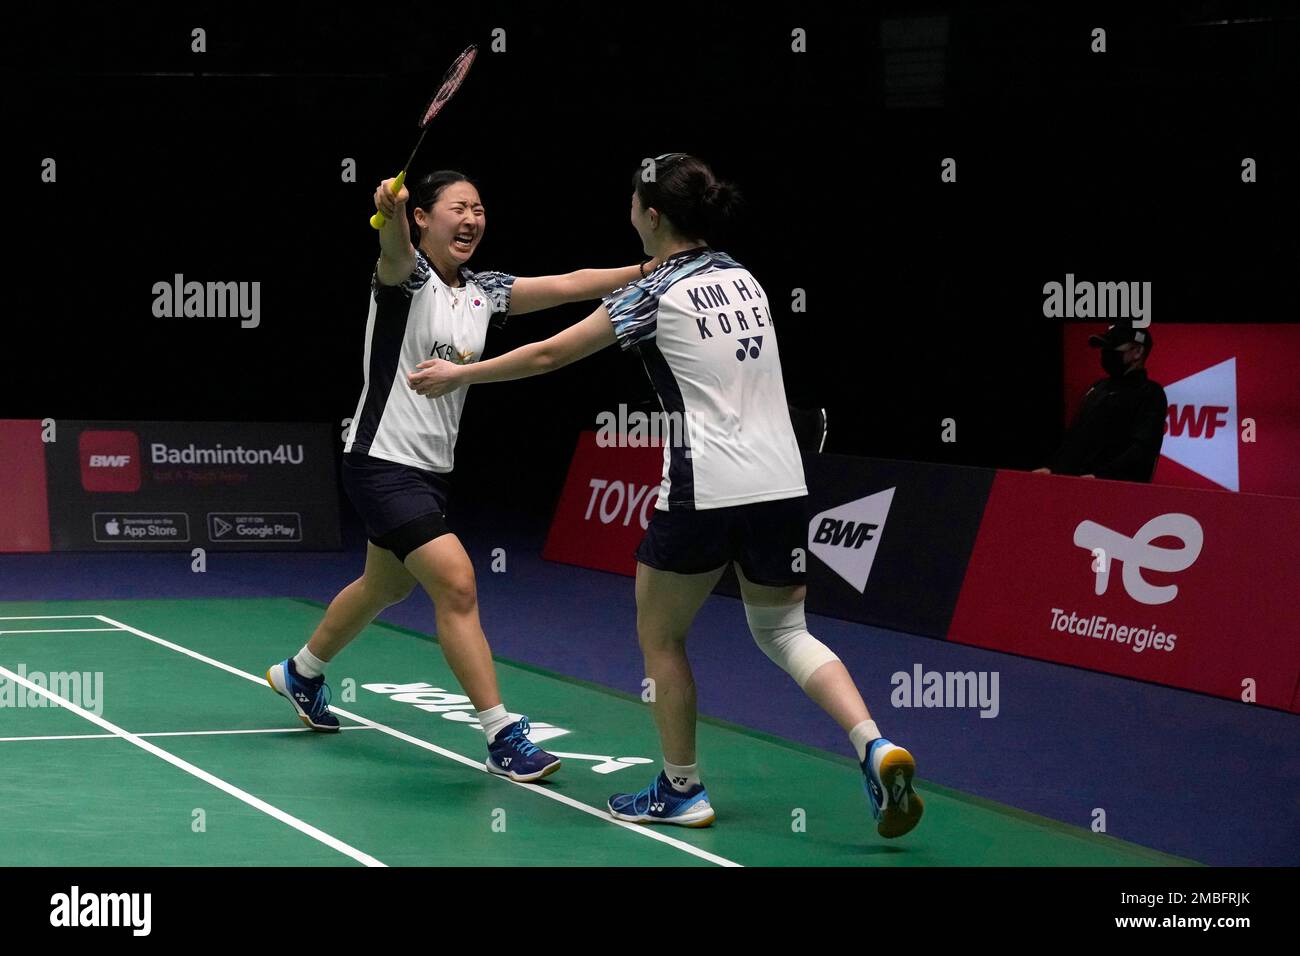 South Koreas Kong Hee-yong, left, and Kim Hye-jeong react after winning over Chinas Huang Dong Ping and Li Wen Mei during their womens double final badminton match at Thomas and Uber Cup